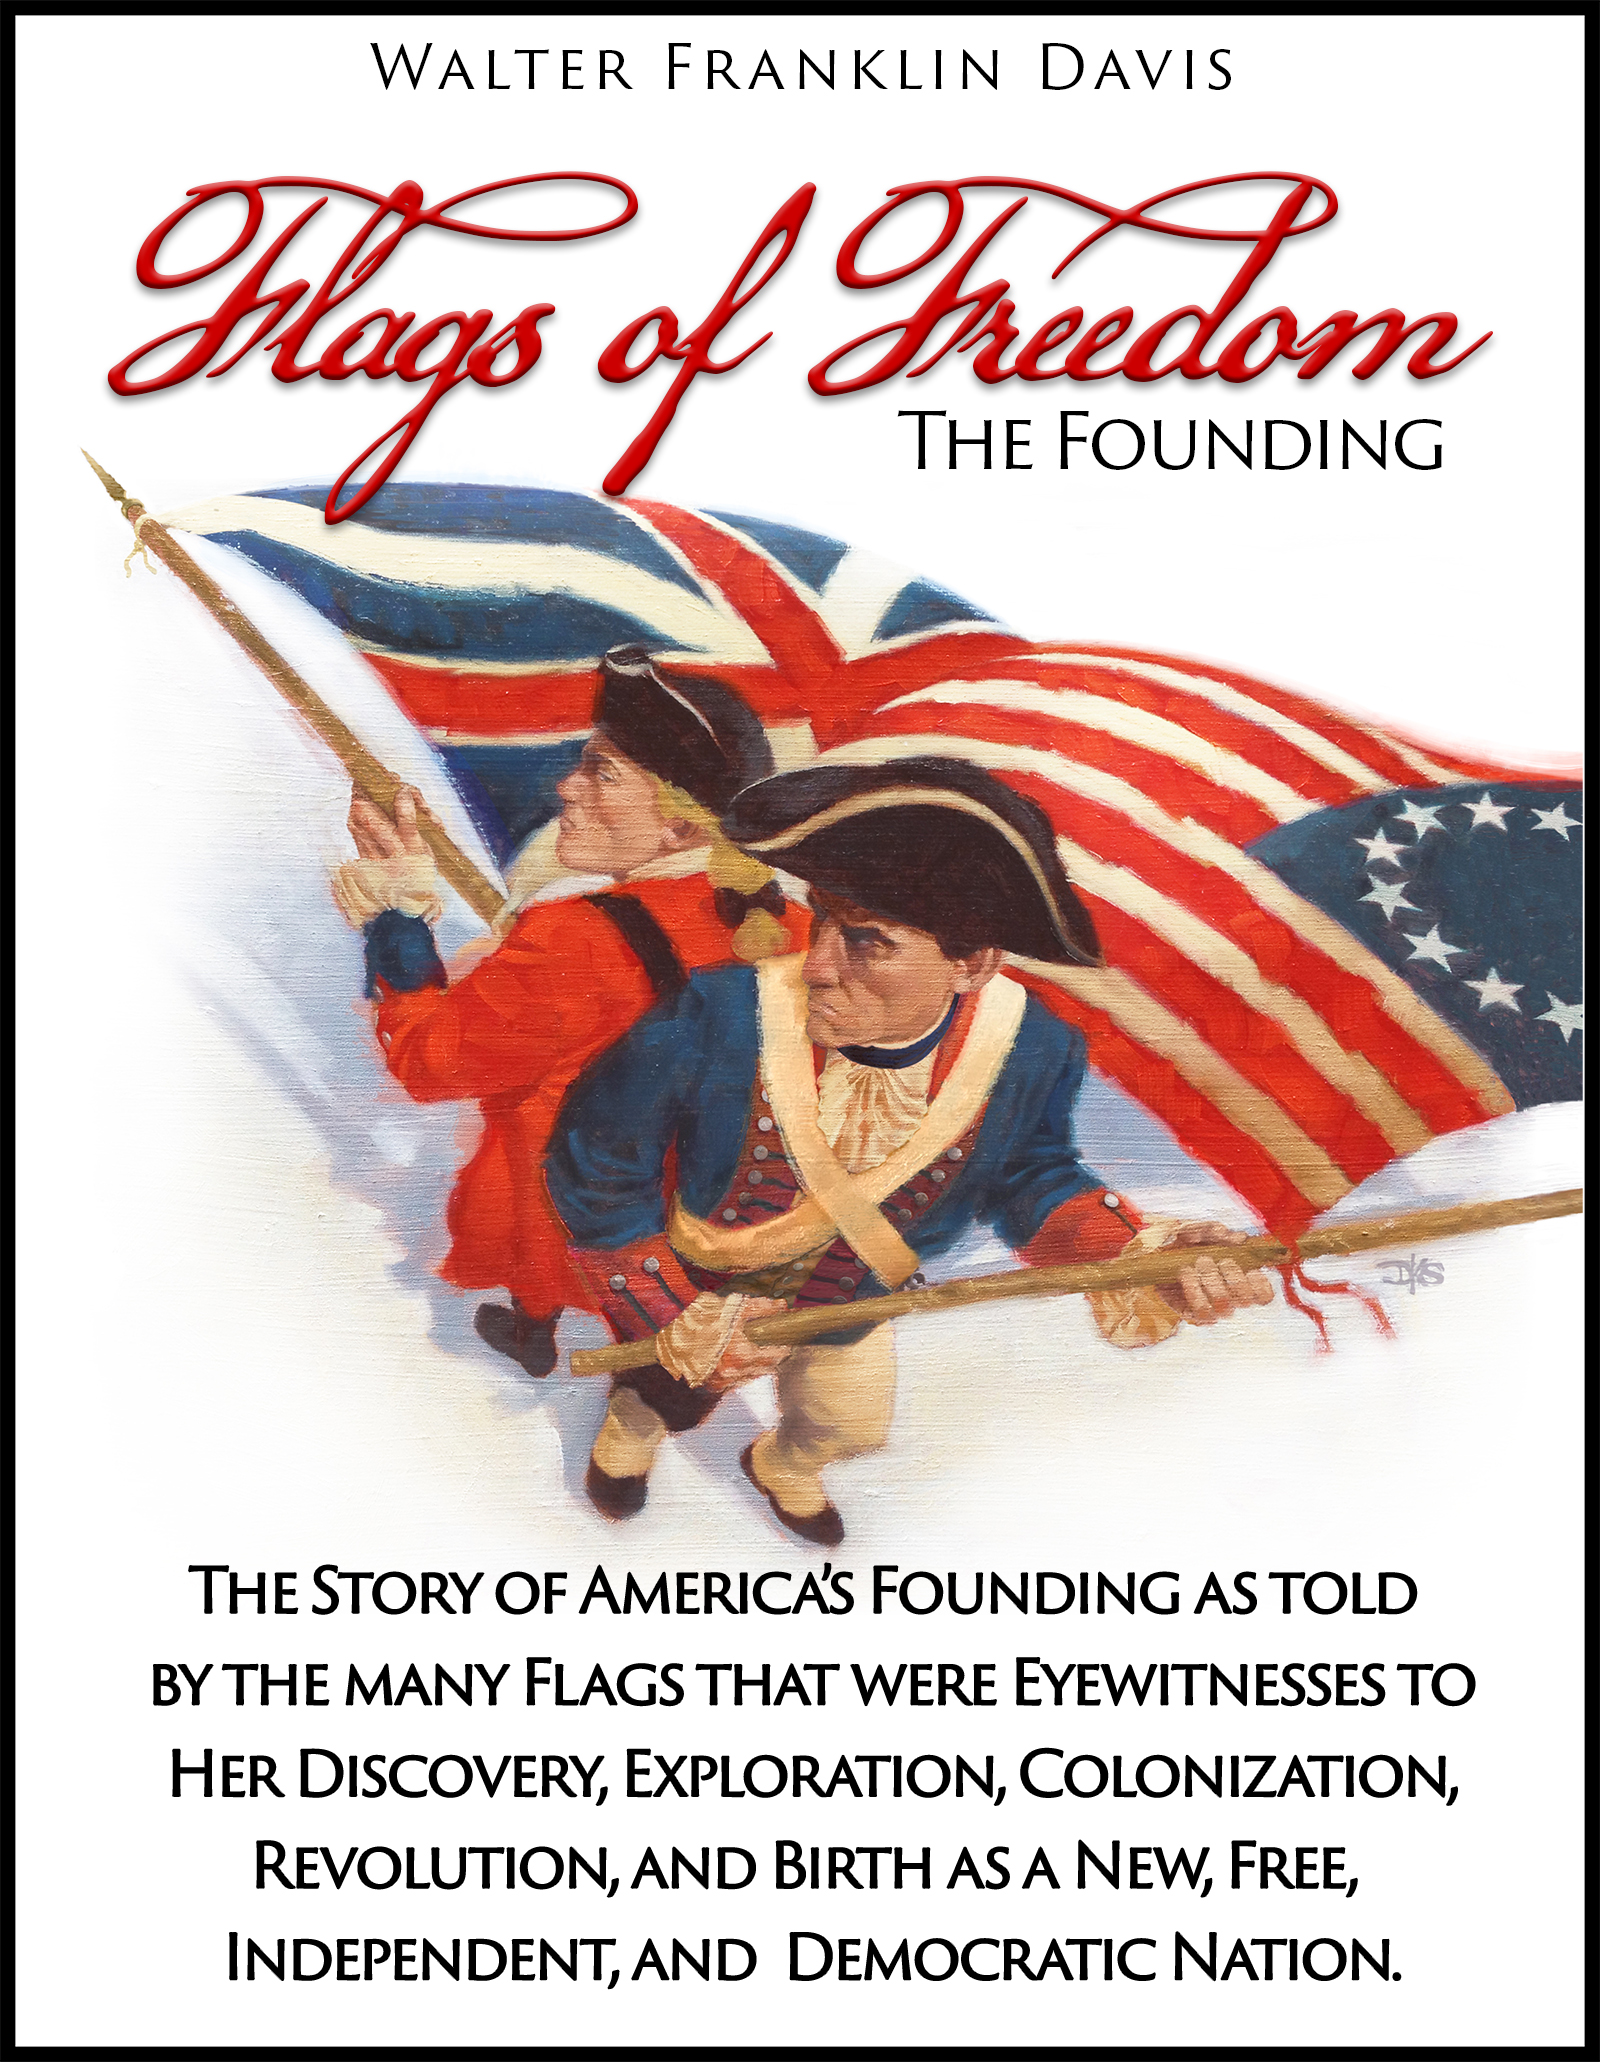 Flags of Freedom - The Founding